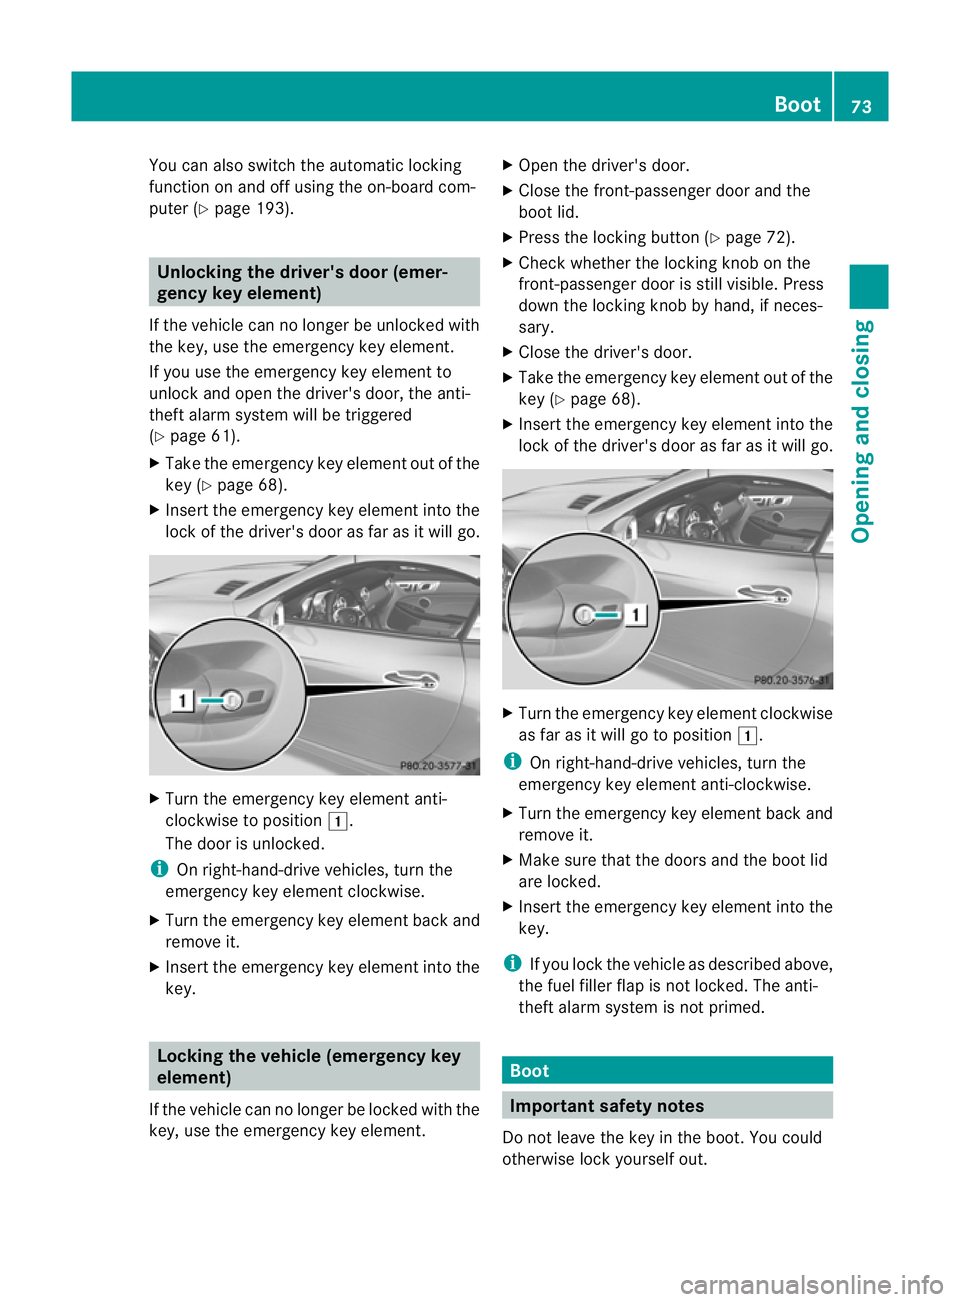 MERCEDES-BENZ SLK ROADSTER 2012  Owners Manual You can also switch the automatic locking
function on and off using the on-board com-
puter (Y page 193). Unlocking the driver's door (emer-
gency key element)
If the vehicle can no longer be unlo